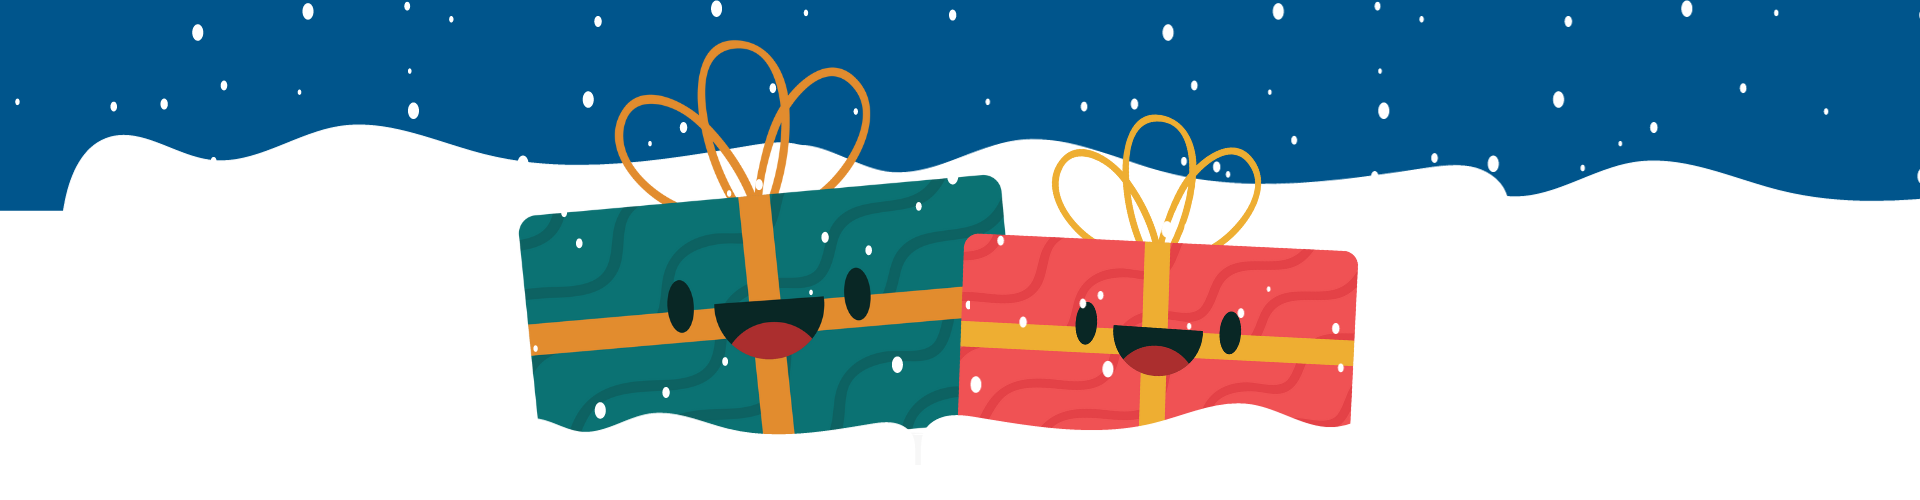 Two colourful, animated present boxes - smiling in a snowy scene